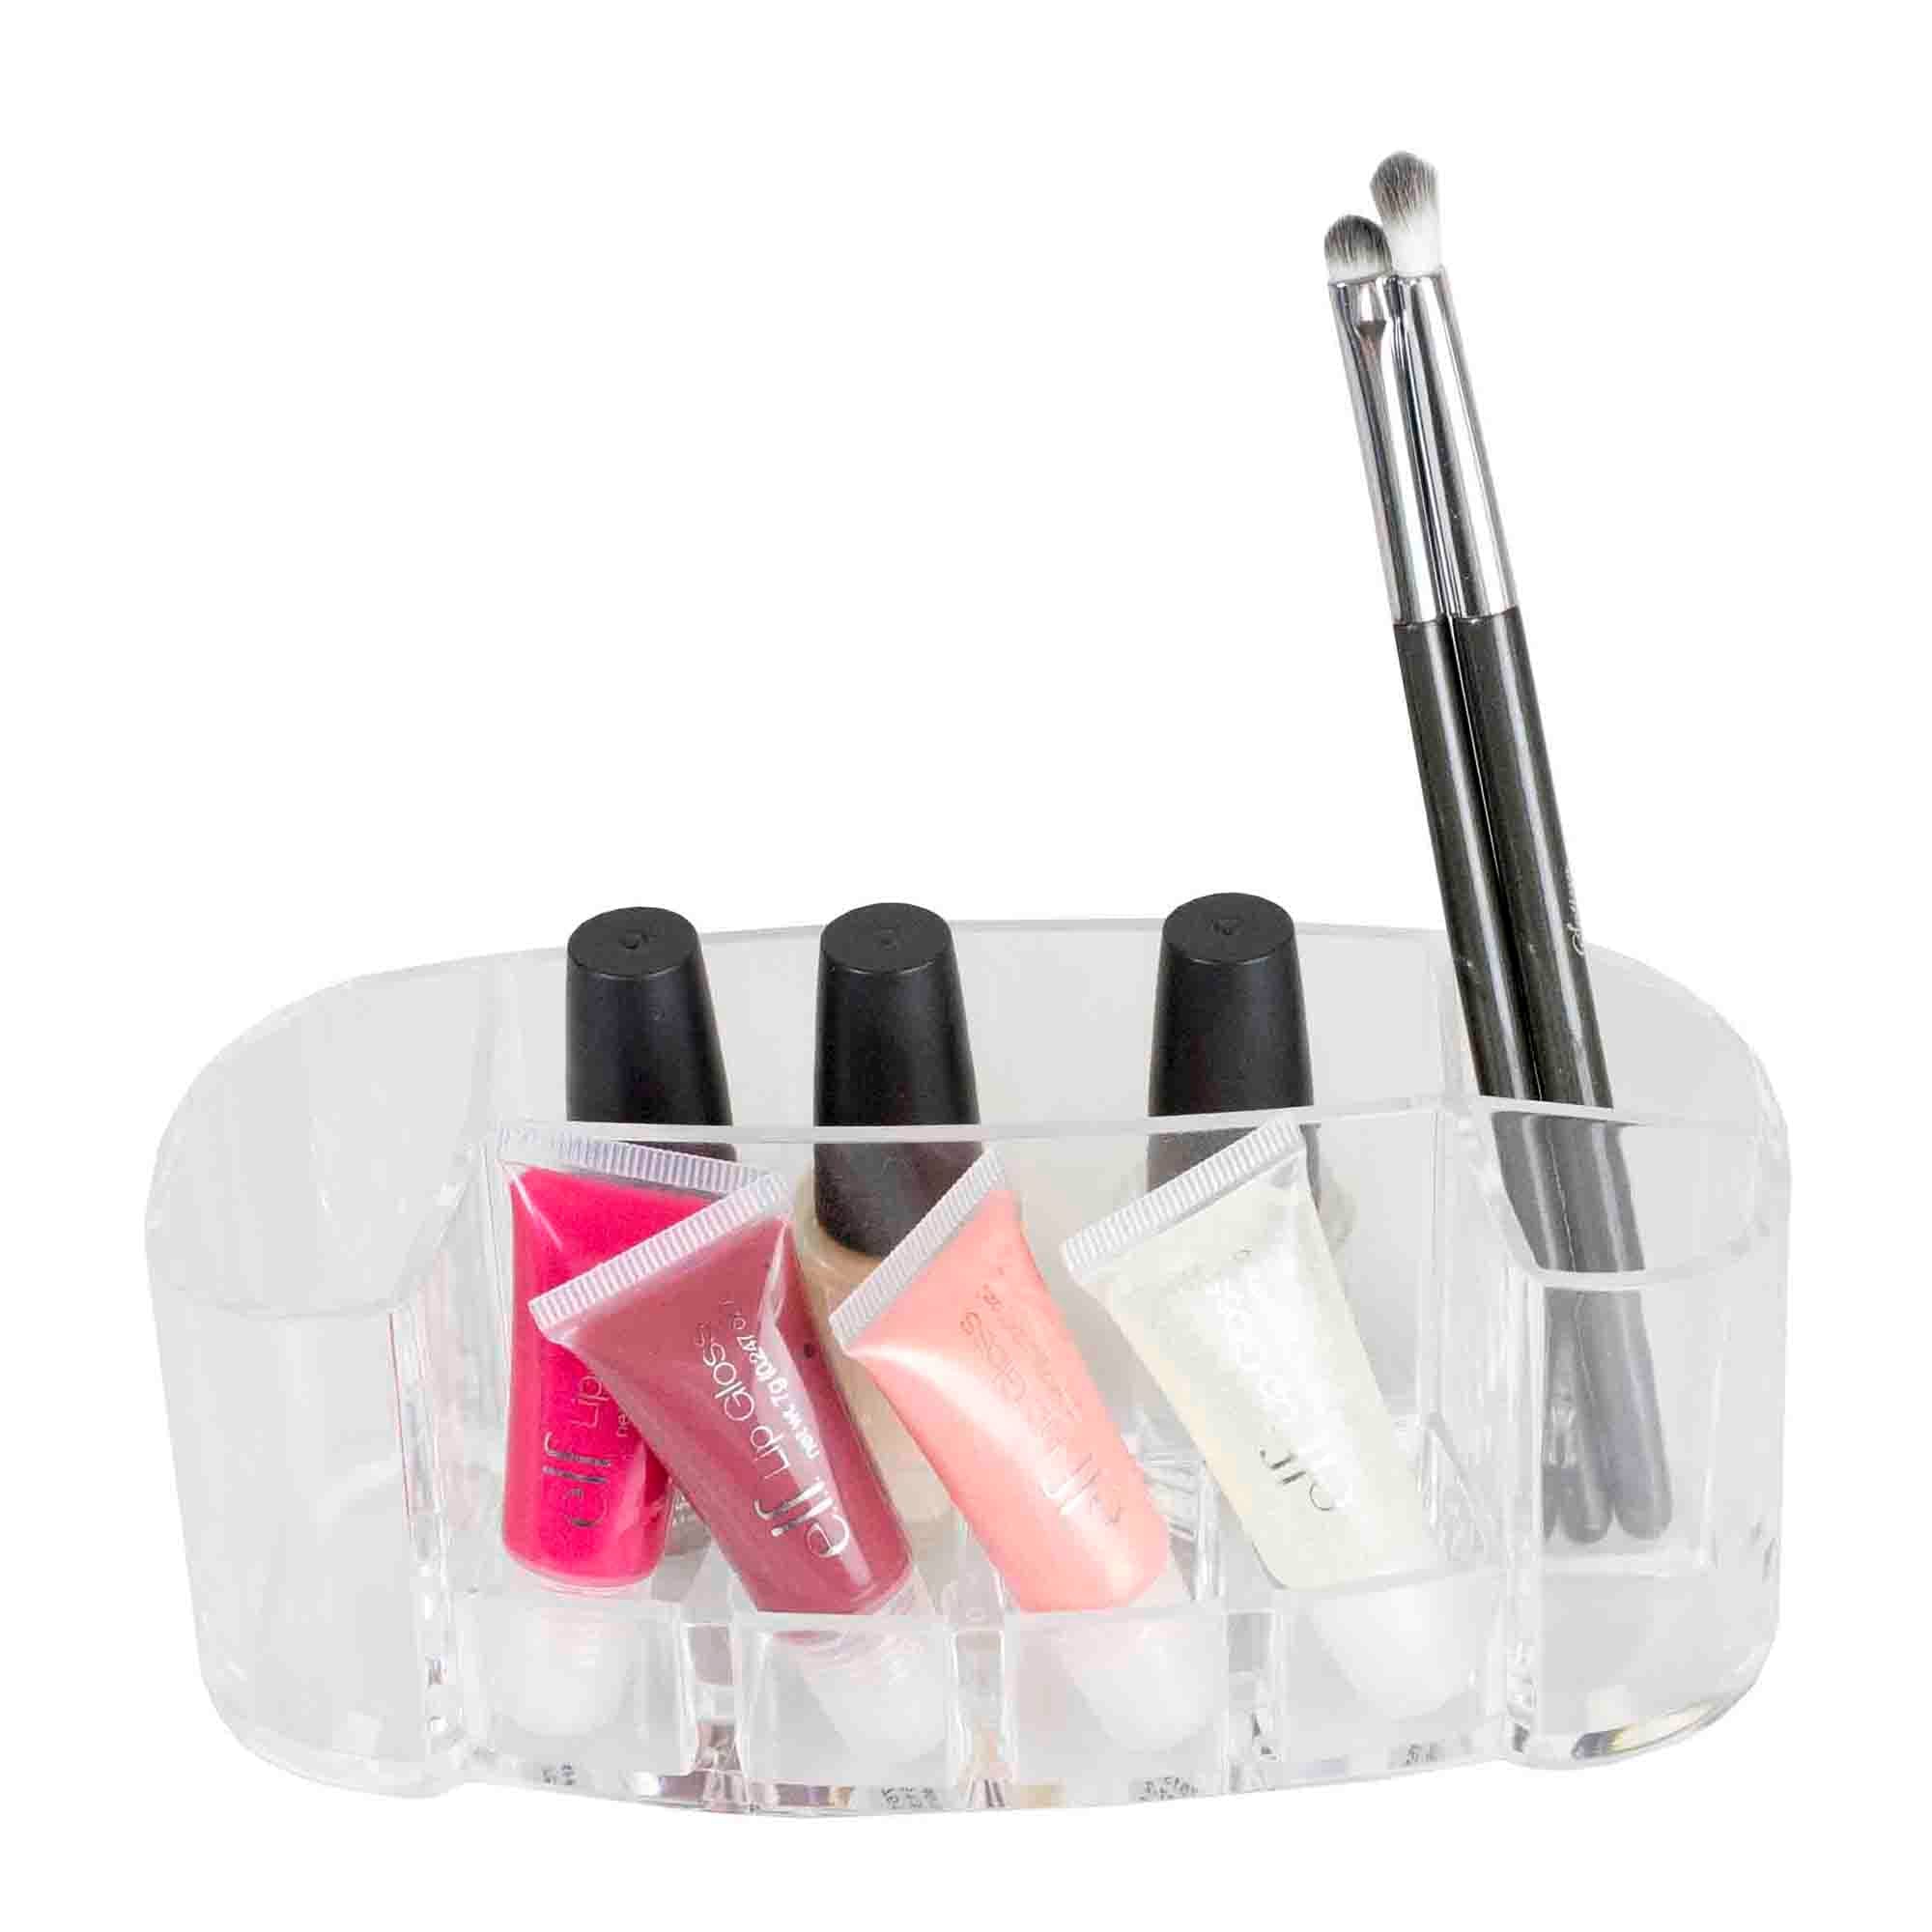 Home Basics Oval Cosmetic Organizer, Clear $2.00 EACH, CASE PACK OF 12